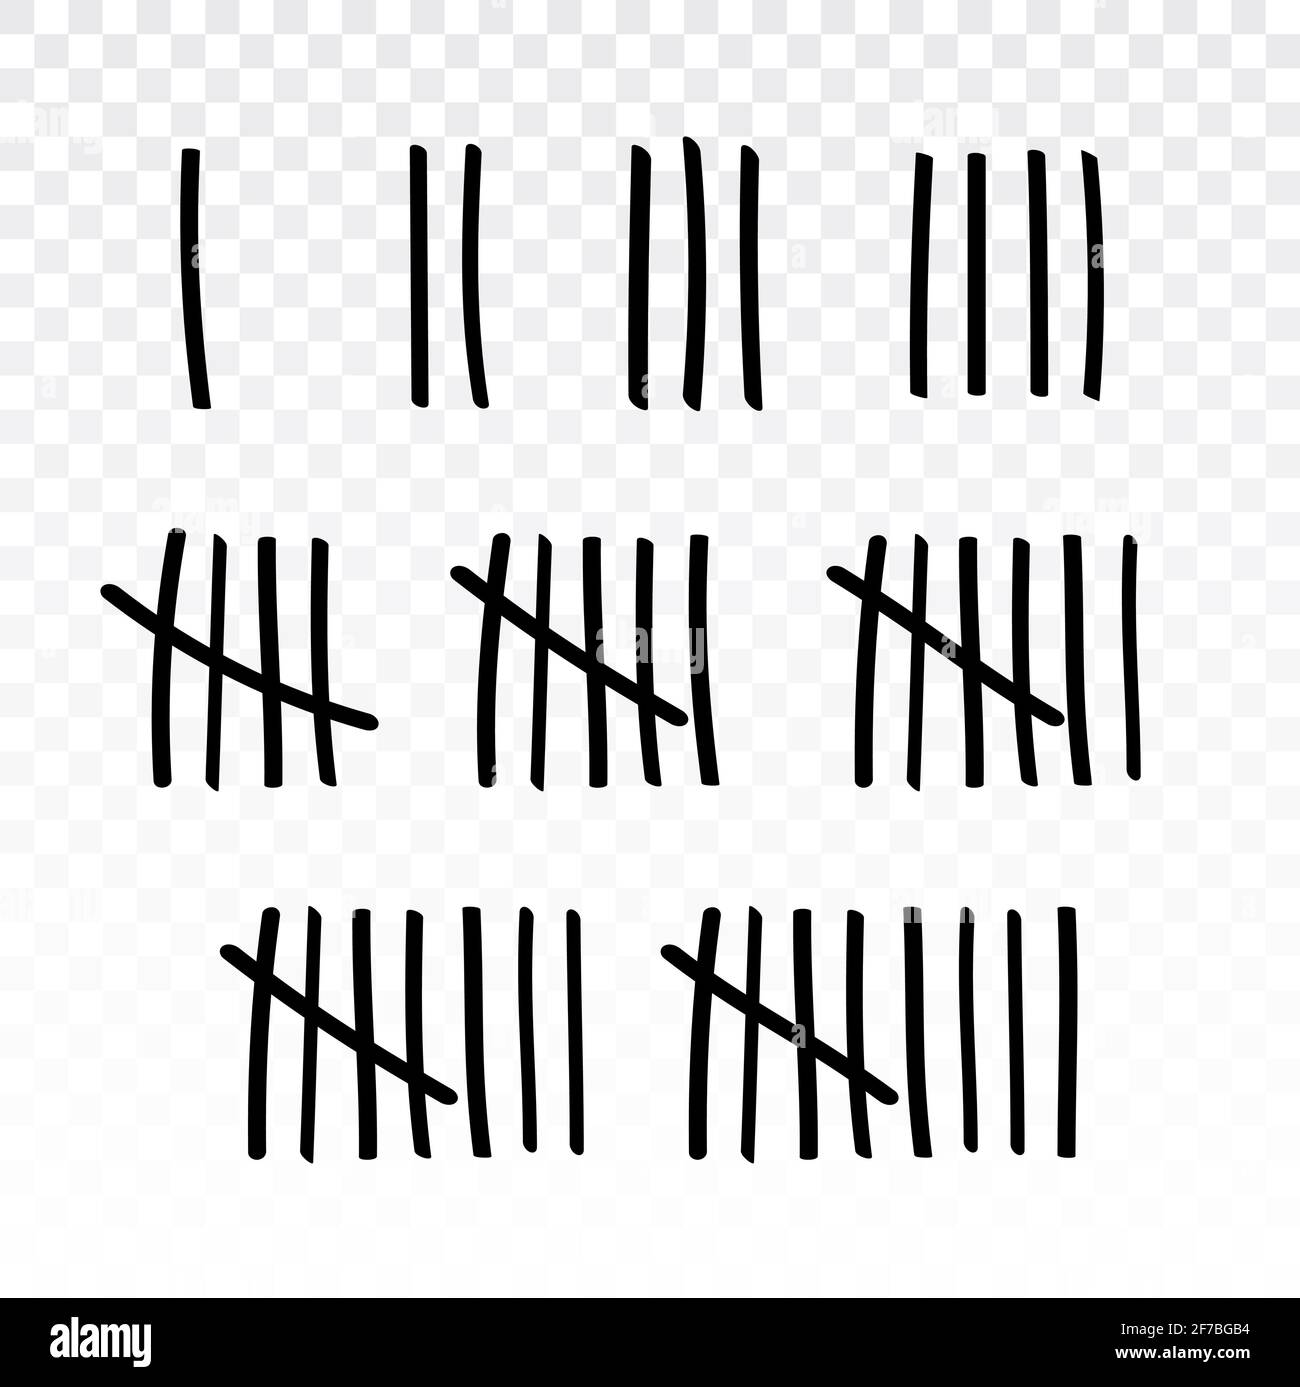 Tally marks prison jail vector wall count. Slash hash brush line number tally mark prison wall Stock Vector